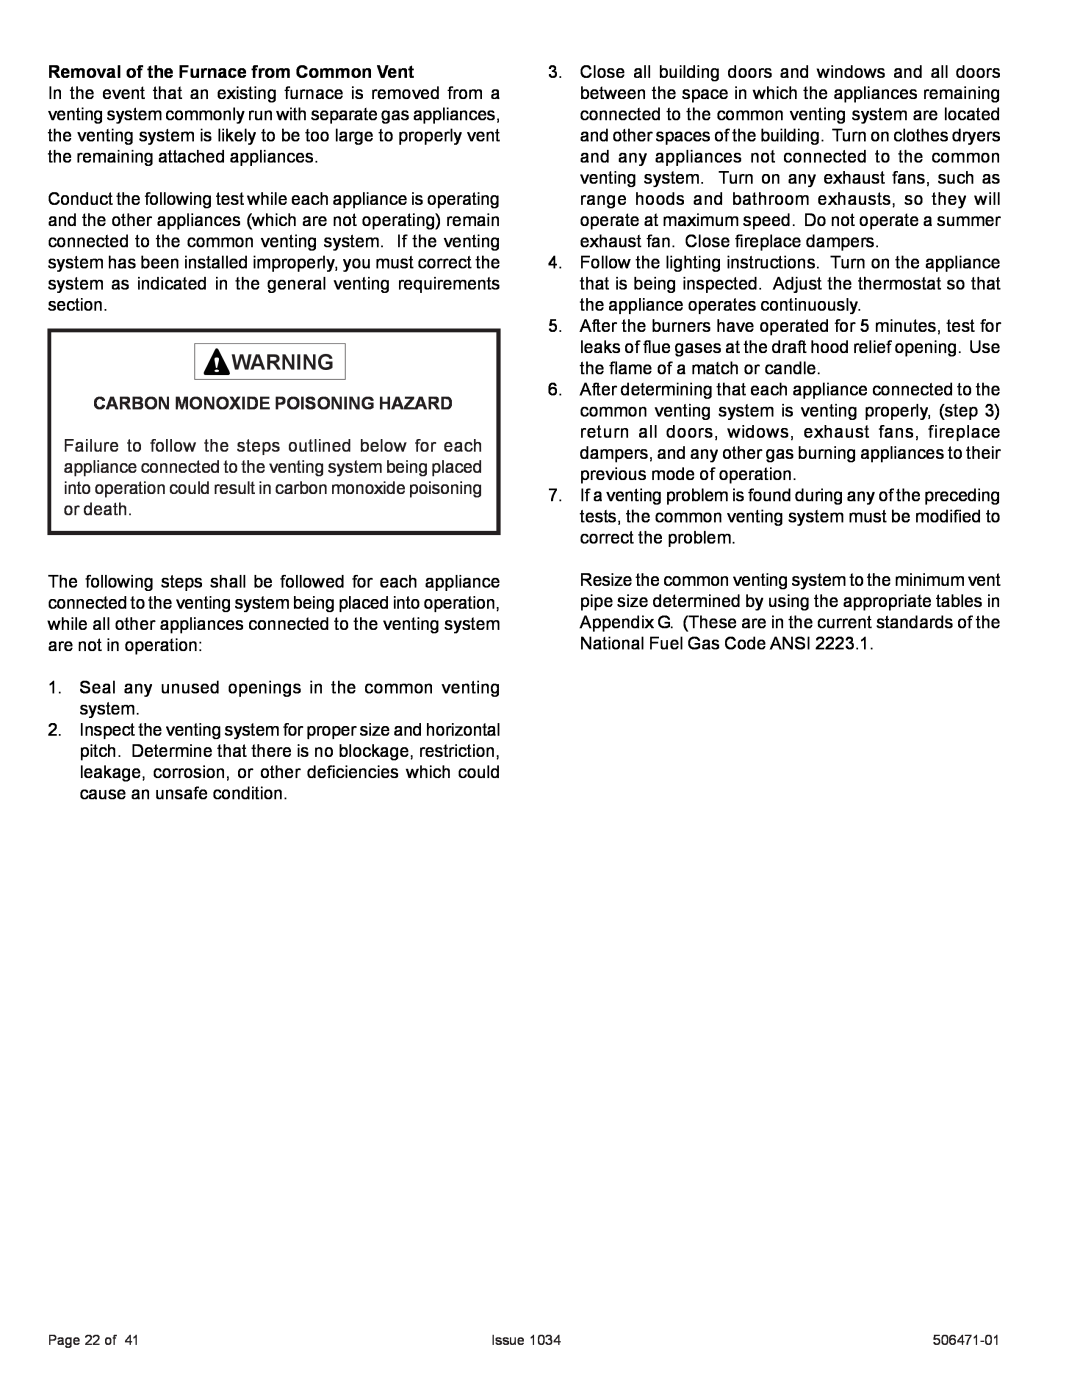 Allied Air Enterprises A80UH2V Removal of the Furnace from Common Vent, Carbon Monoxide Poisoning Hazard, Page 22 of 